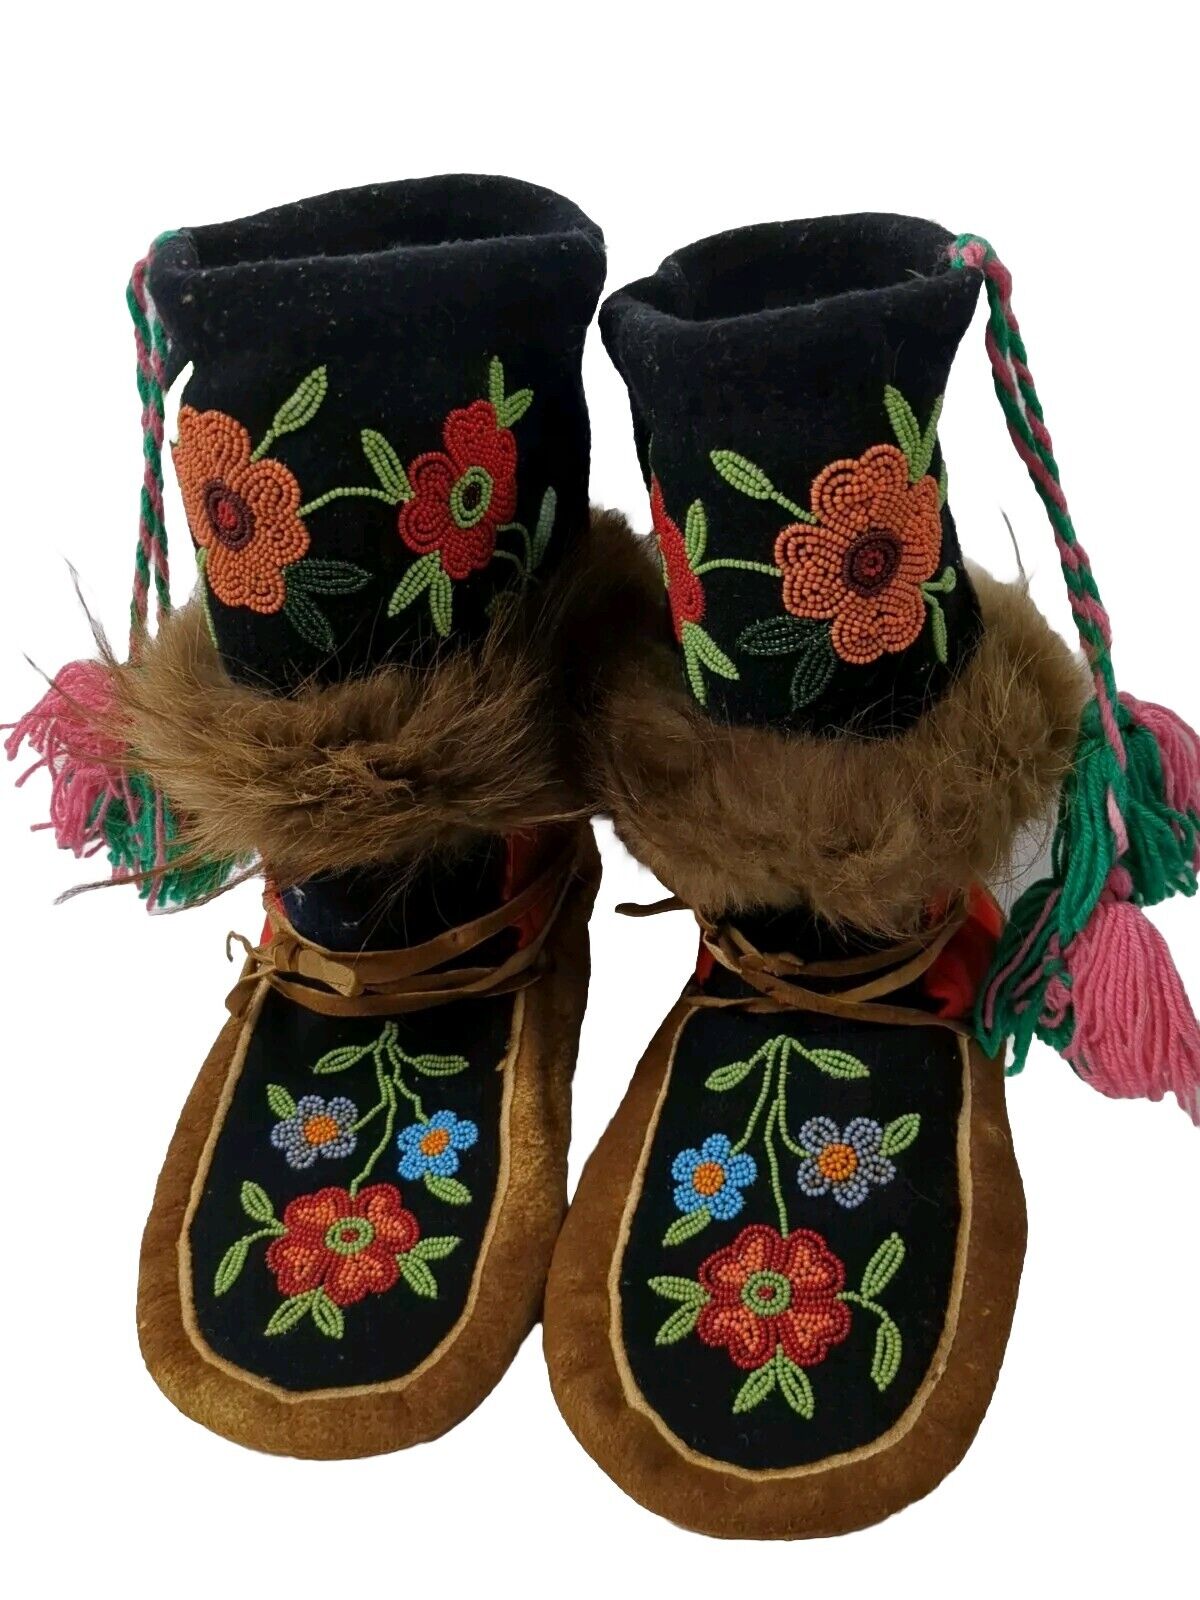 Vintage Native American Mukluks Moccasins Boots Beaded Floral Canada EUC